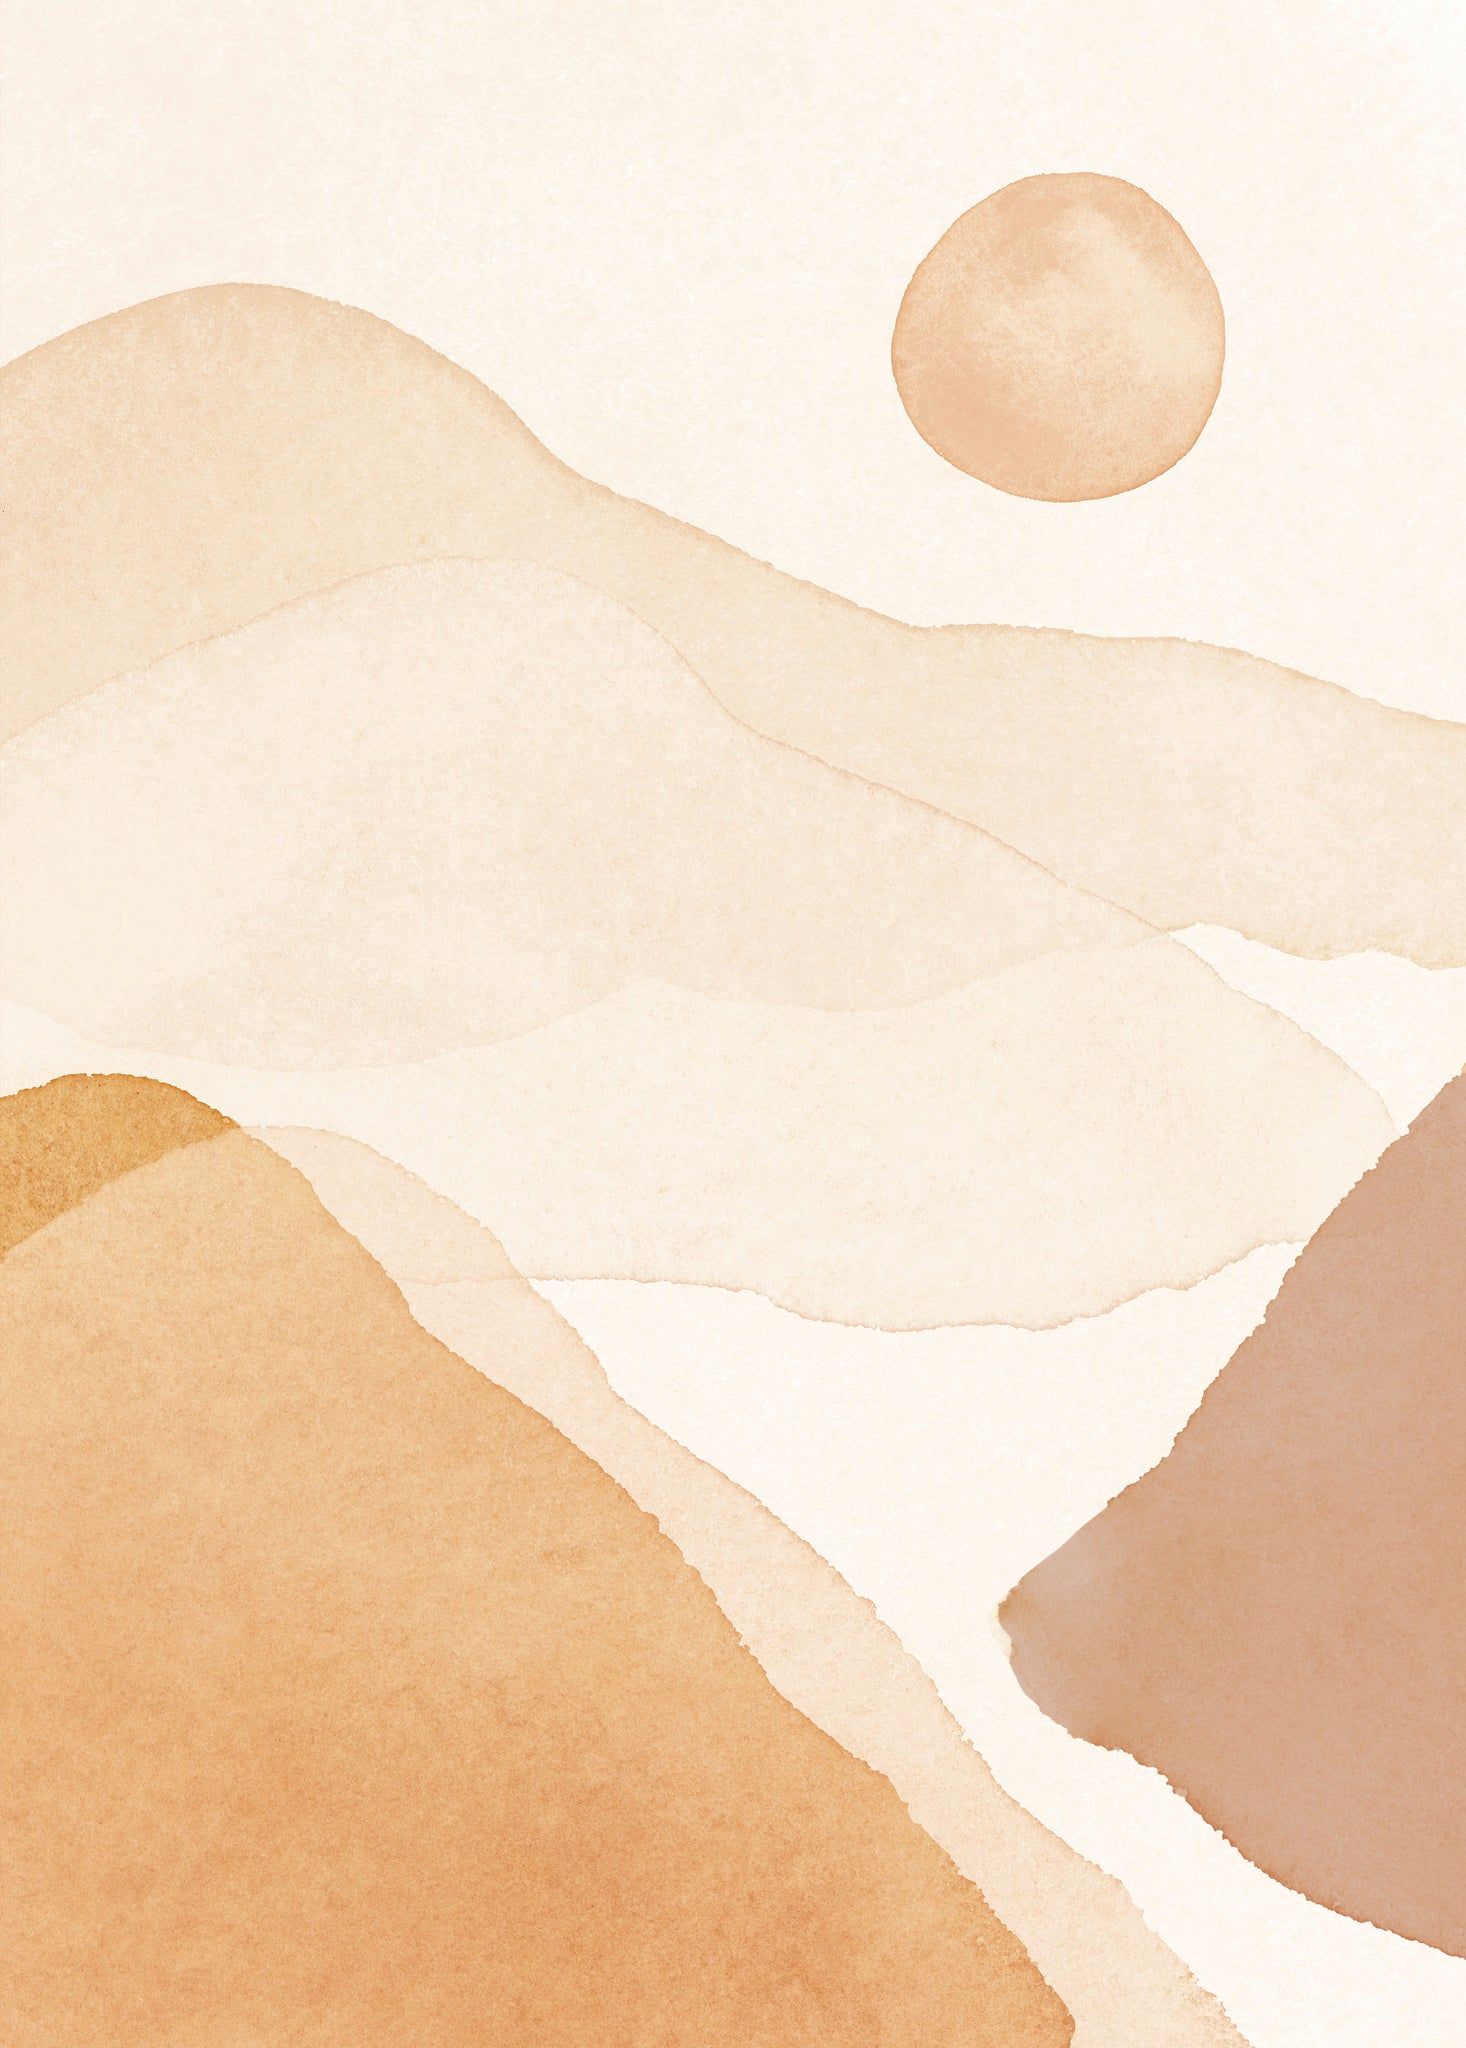 Download this free watercolor desert landscape for your next project. - Terracotta